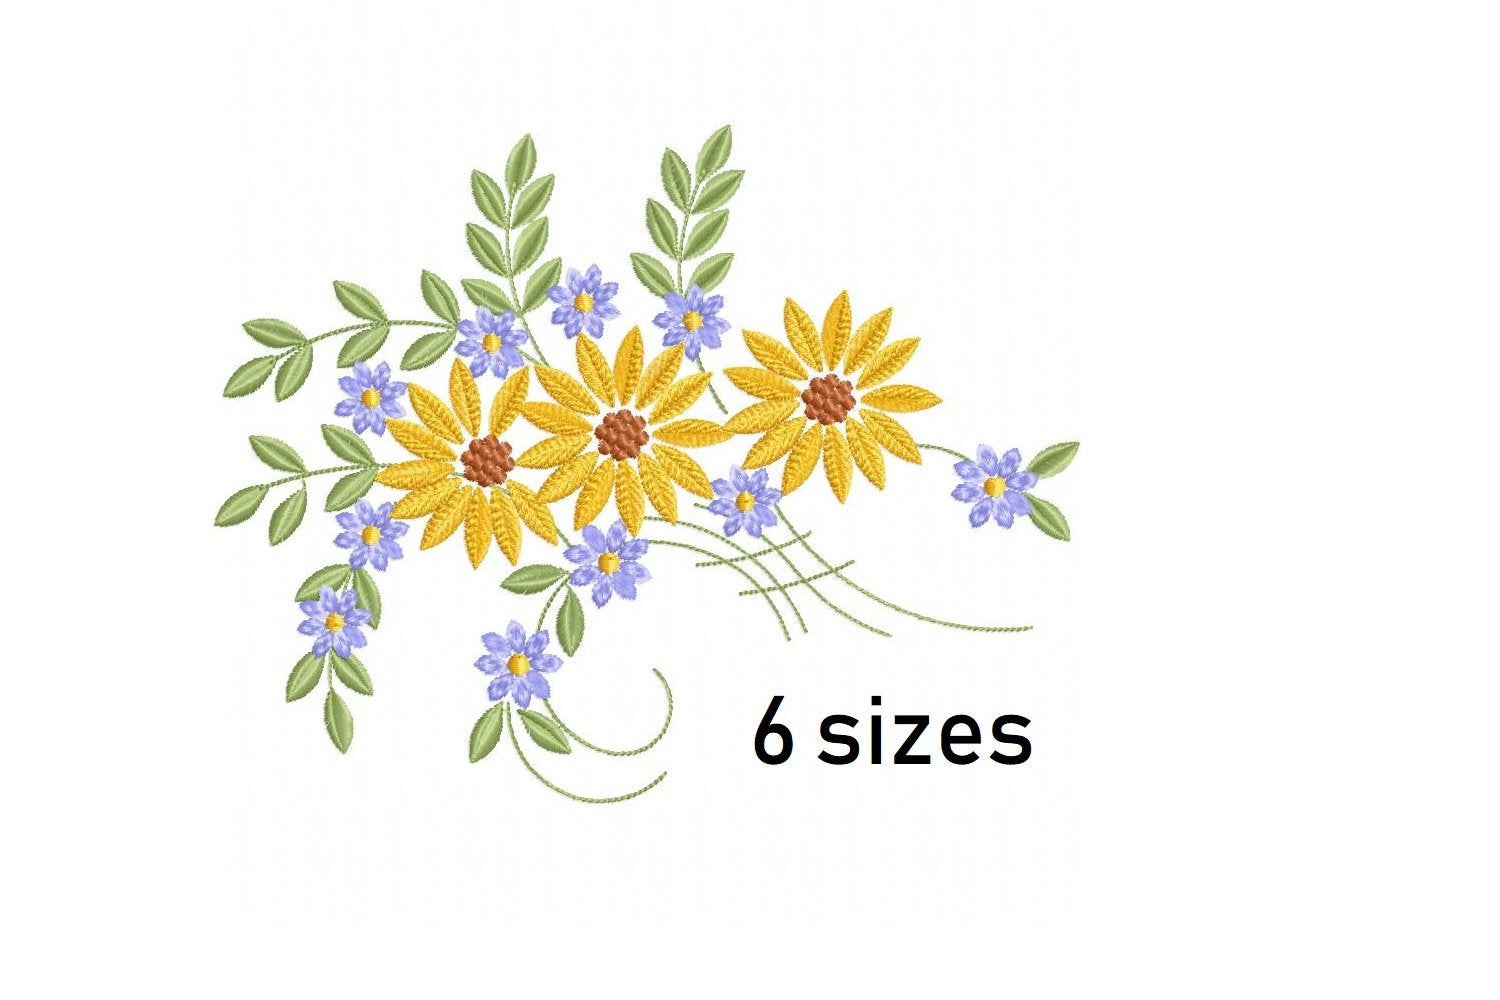 Embroidery Patterns Flowers Flowers Embroidery Designs Cute Flowers Embroidery Design Machine Embroidery Pattern Embroidery File Floral Embroidery Flower Fill Stitch